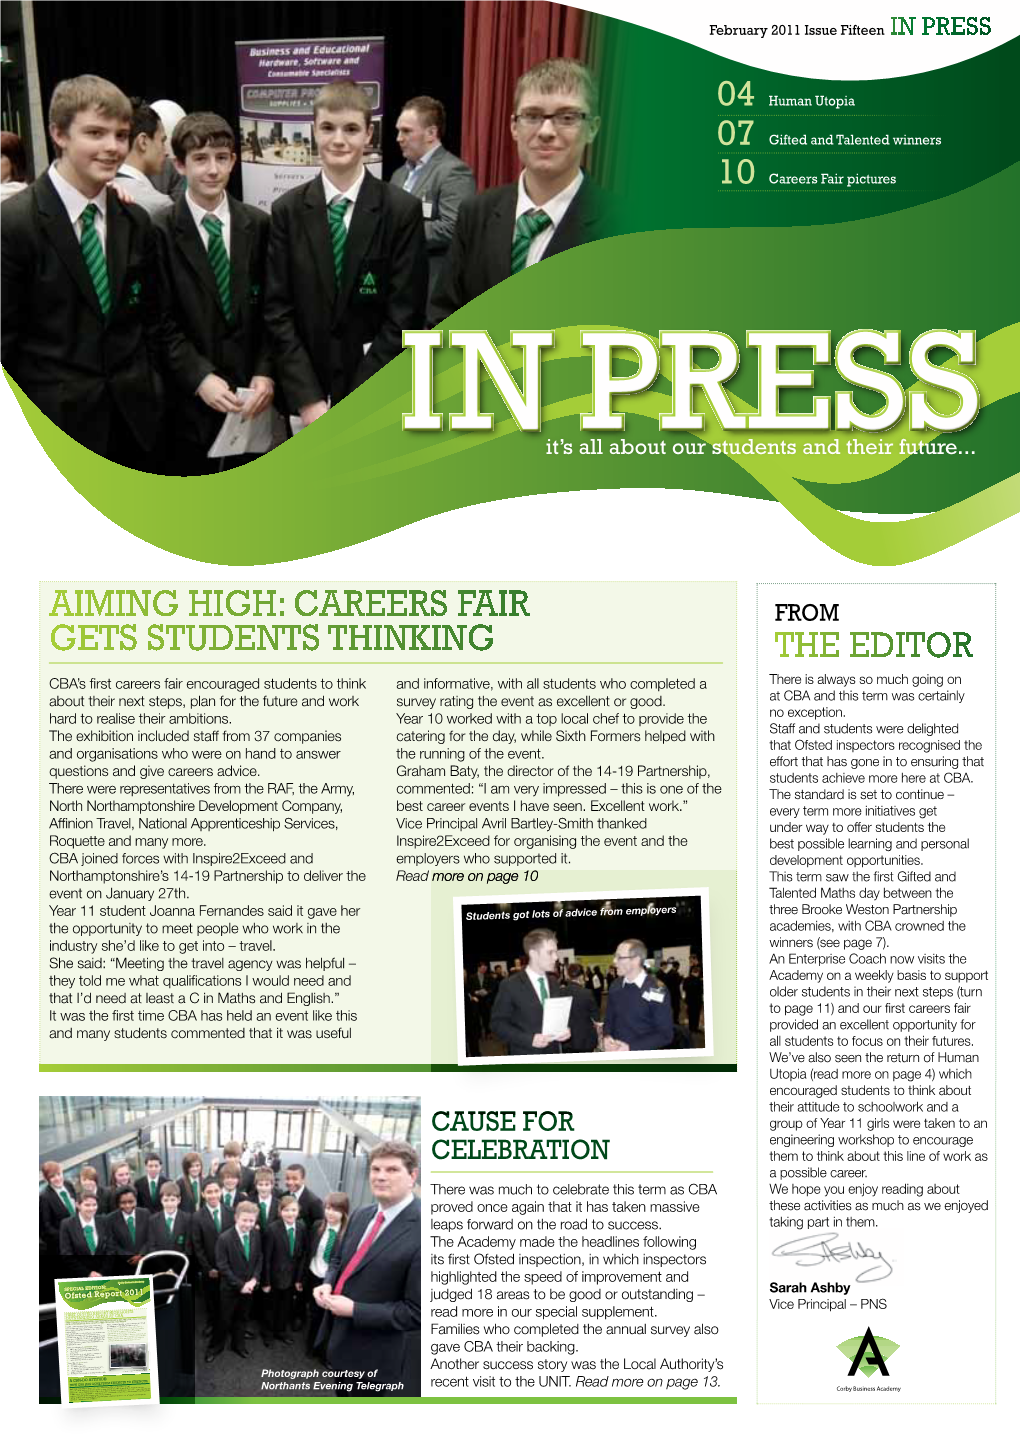 Aiming High: CAREERS FAIR Gets Students Thinking